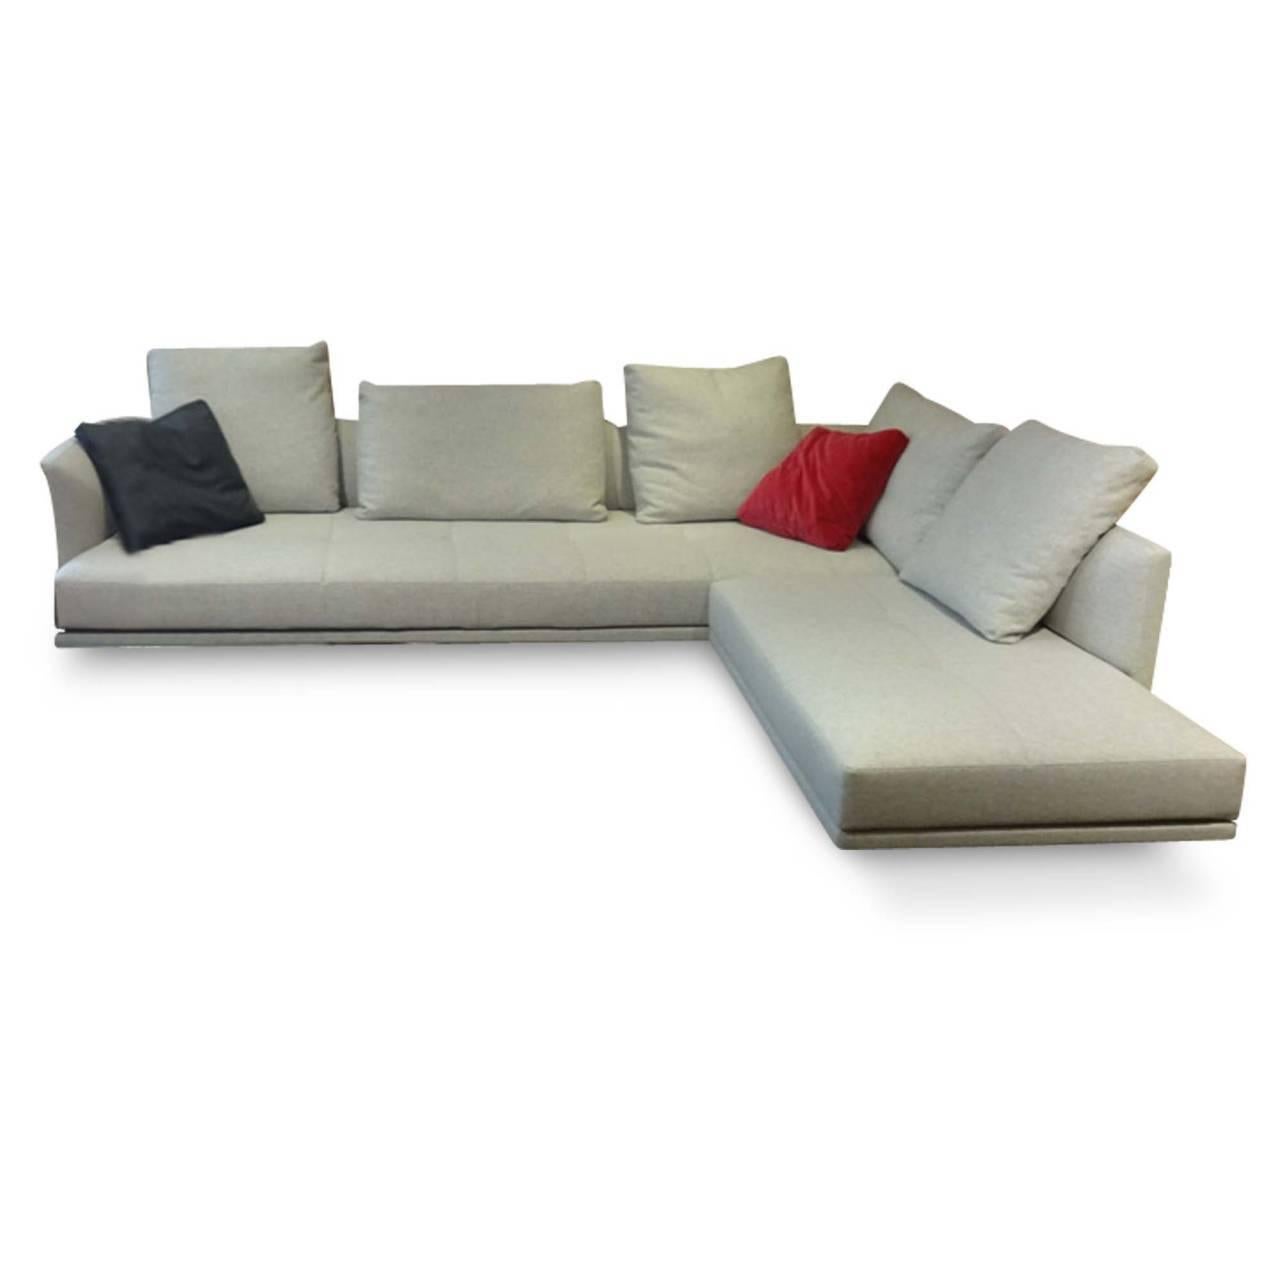 We are delighted to present to you the stunning L-formed Sofa 